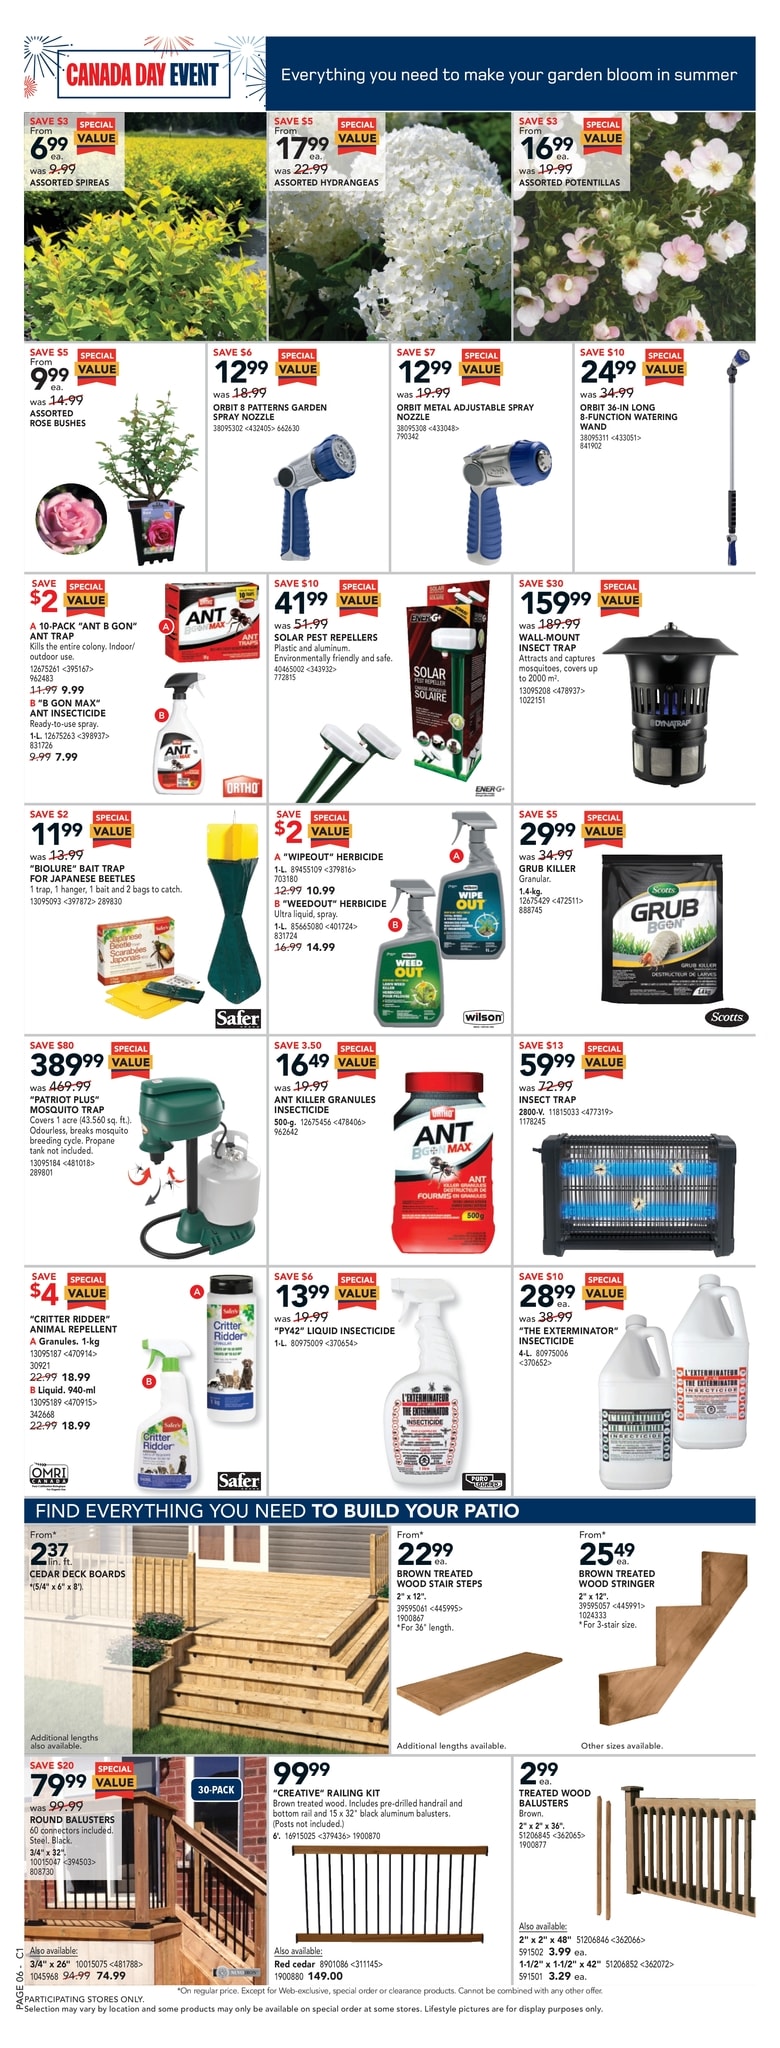 Rona - Weekly Flyer Specials - Page 9